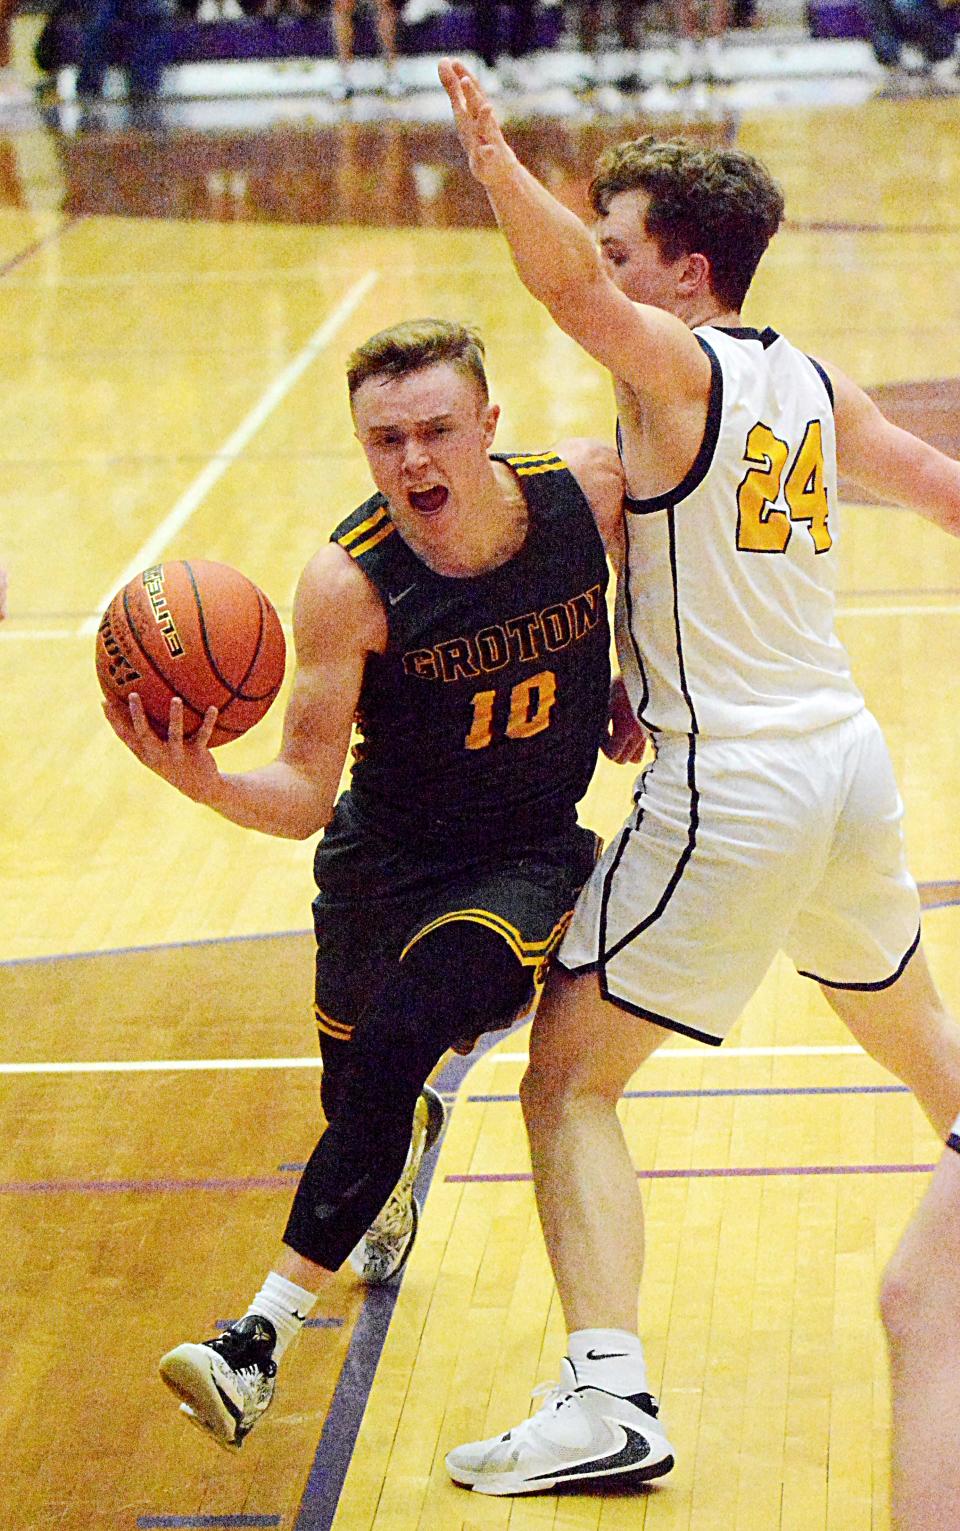 Groton Area's Lane Tietz drives against Sioux Valley's Oliver Vincent during their Class A SoDak 16 state-qualifying boys basketball game on Tuesday, March 7, 2023 in the Watertown Civic Arena.